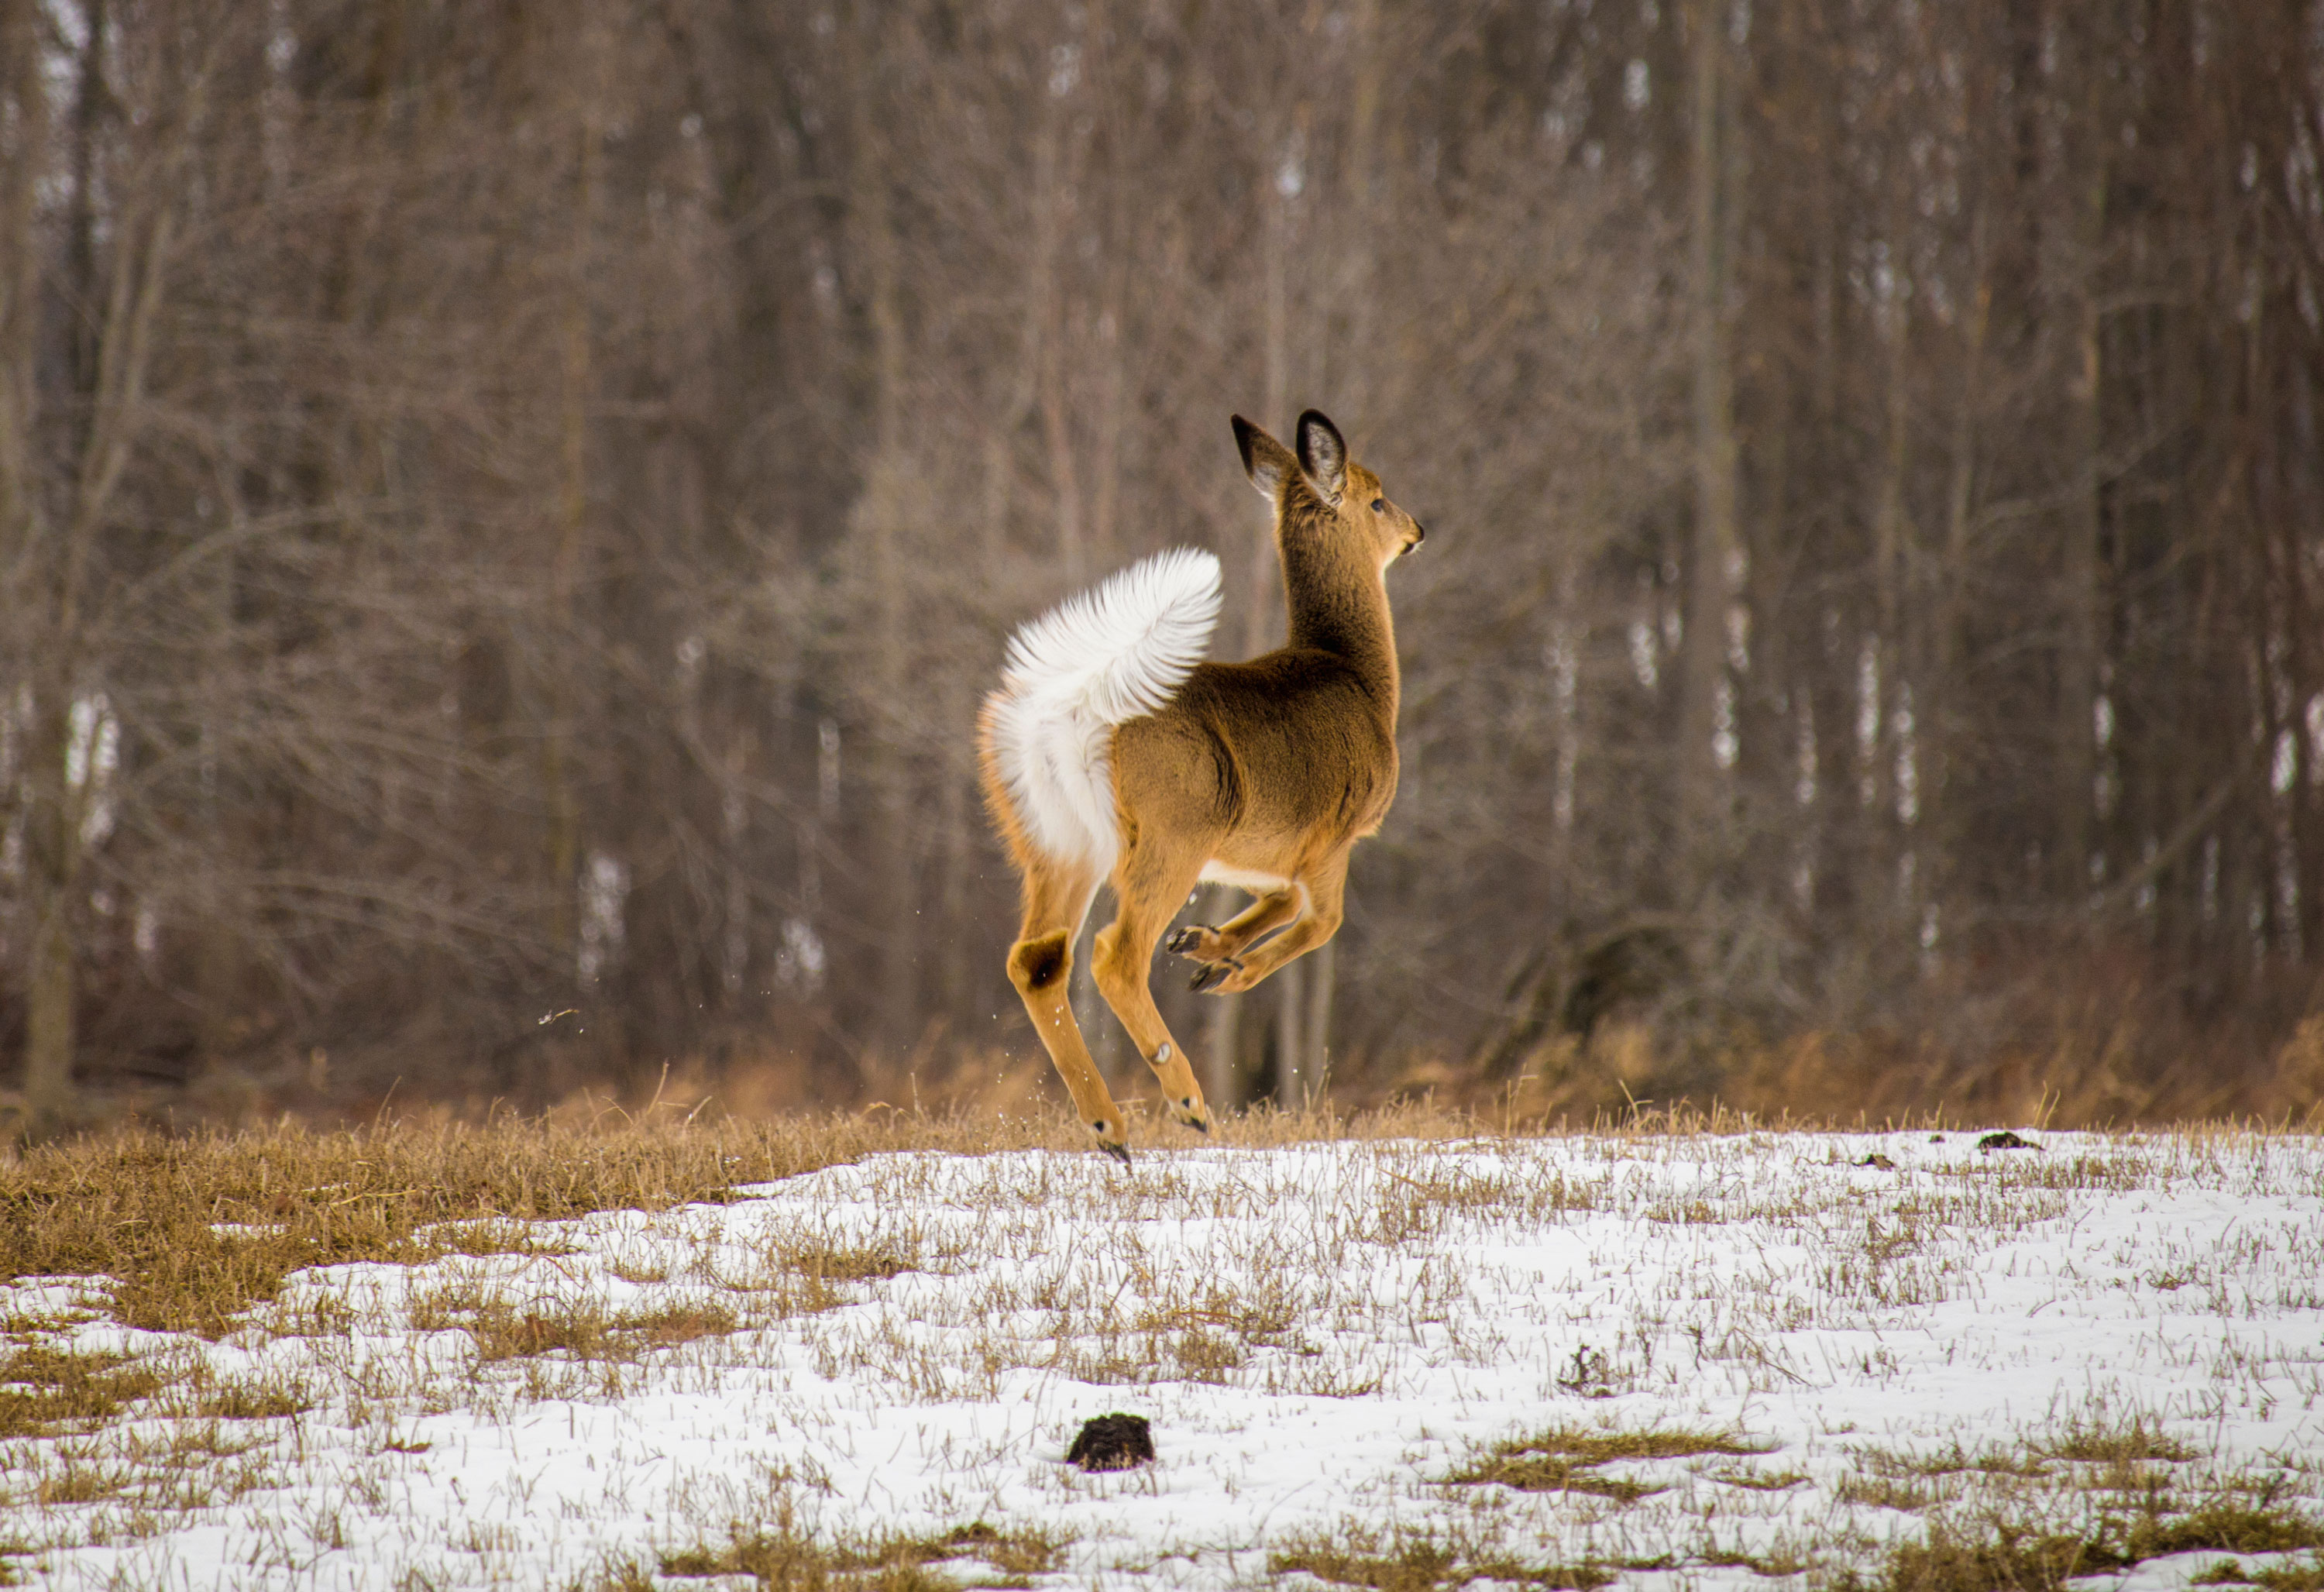 A deer jumping in a forest exposing its white tail.